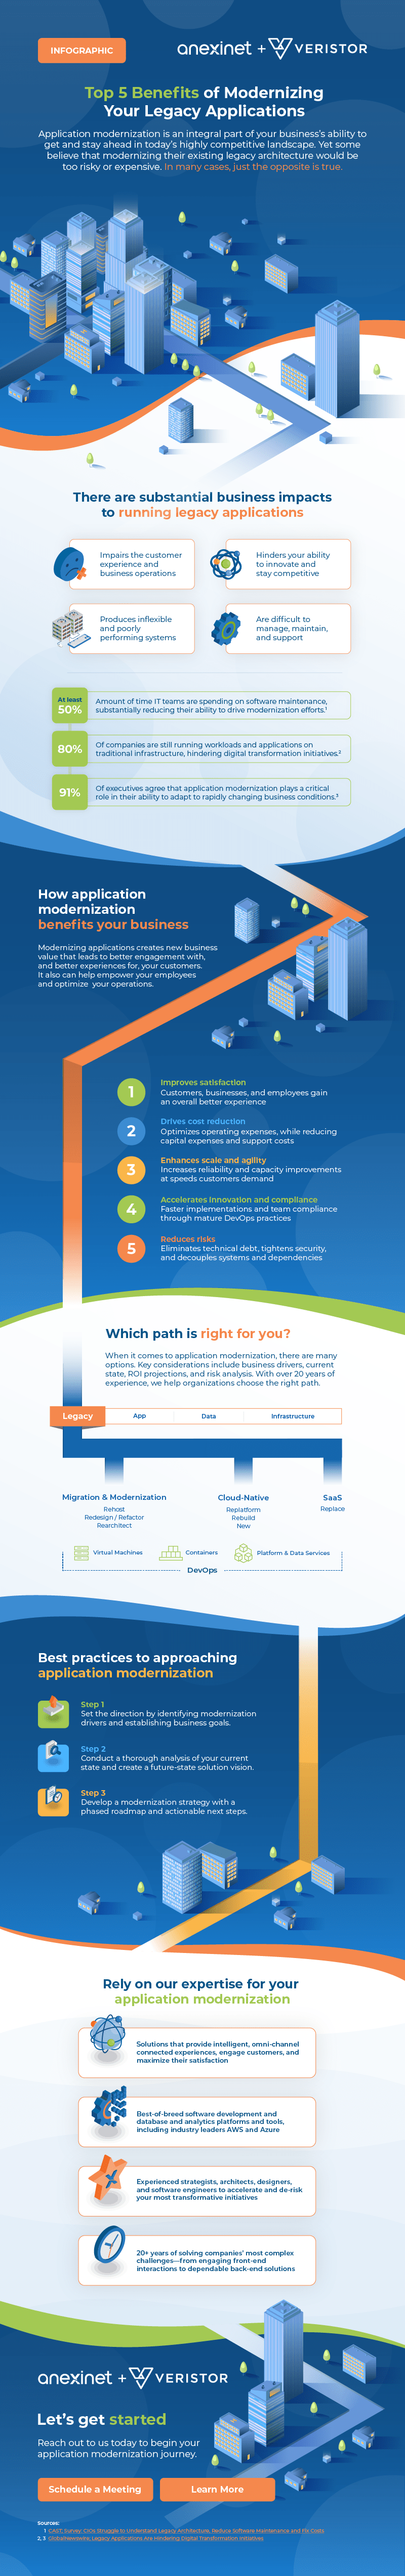 Long scrolling infographic with isometric graphics and colored primarily dark blue with pops of orange, light blue, green, and red on the subject of app modernization